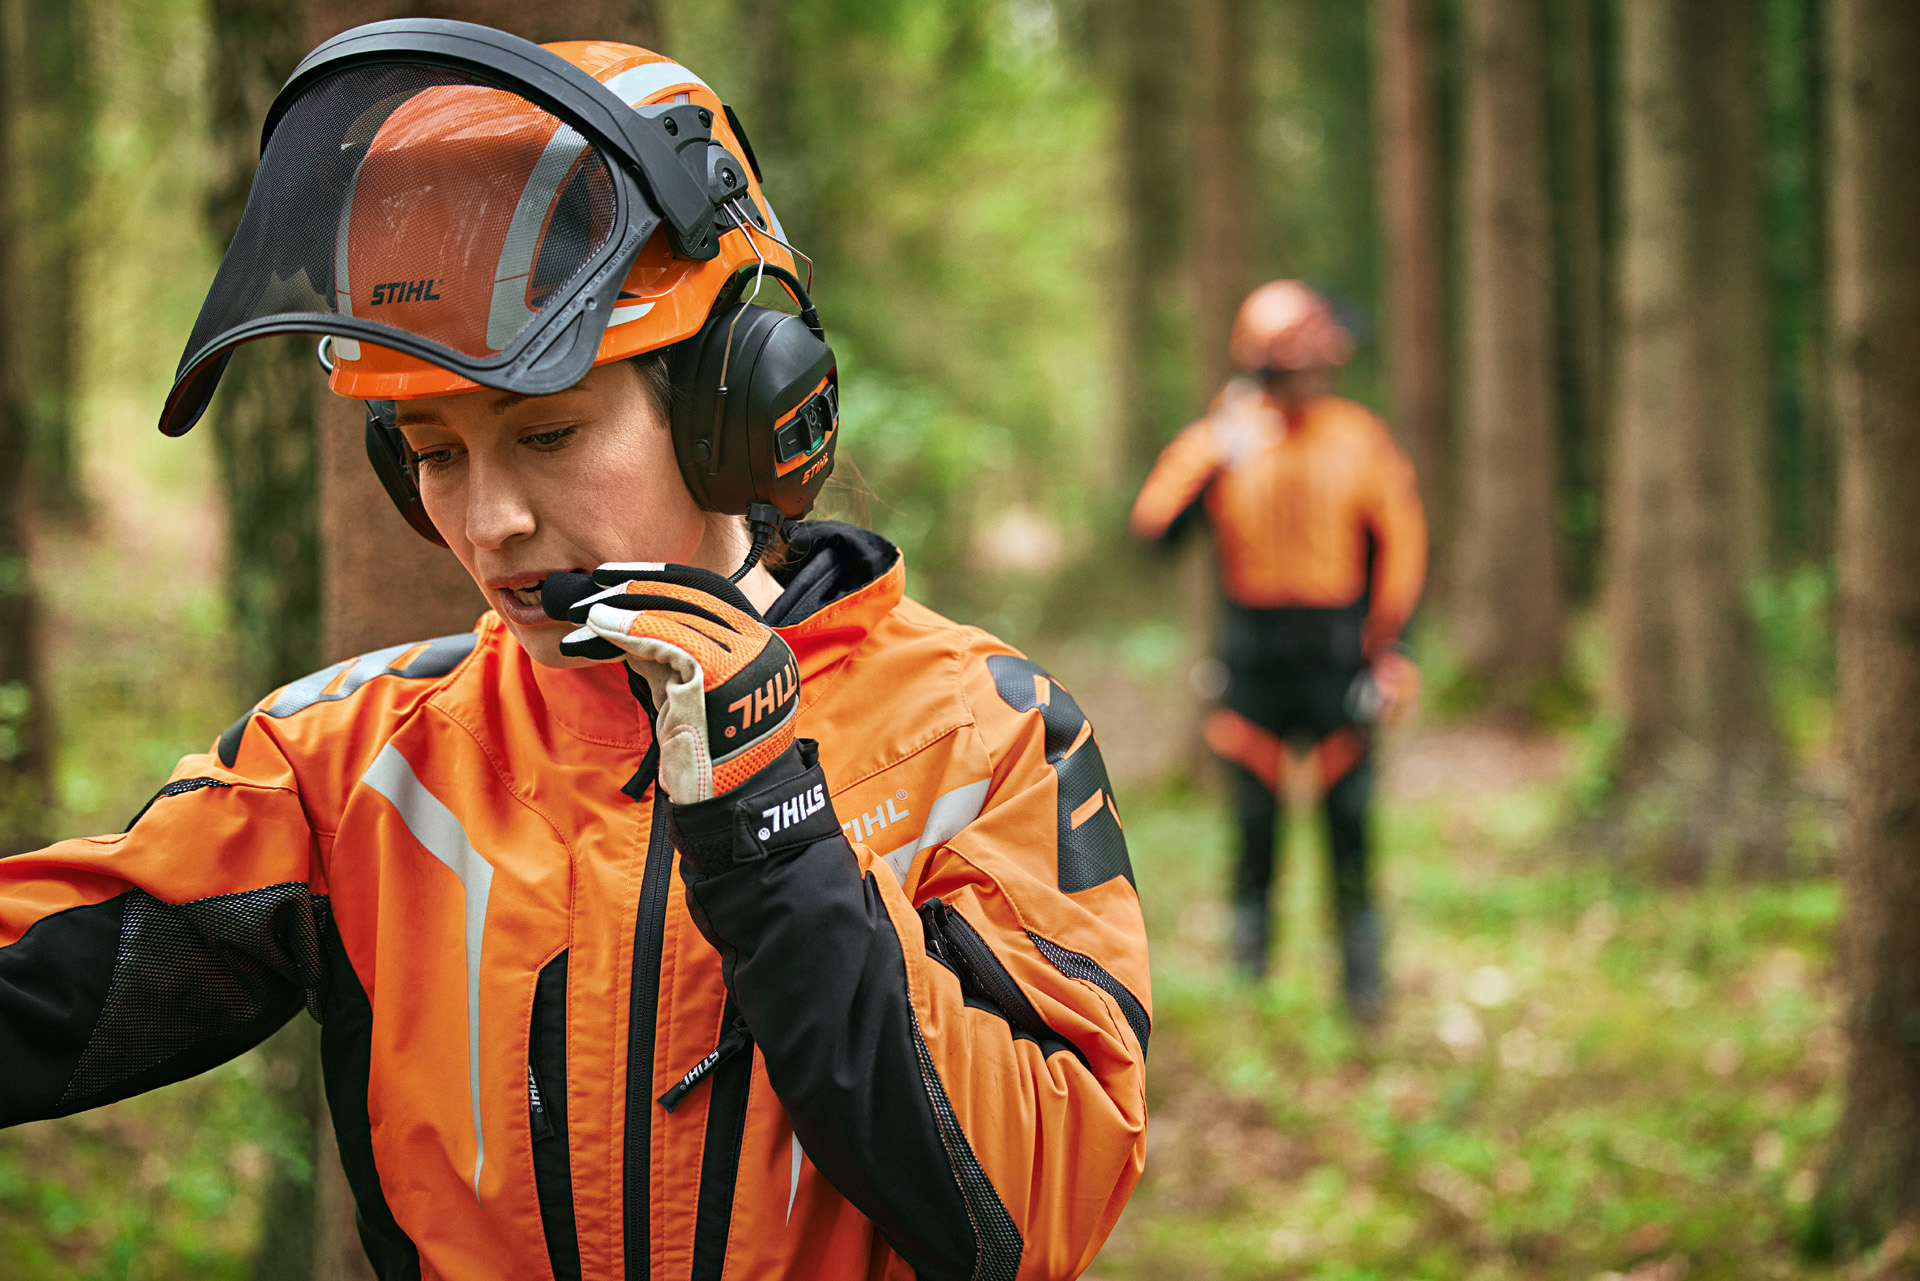 The New ProCom headsets from Stihl